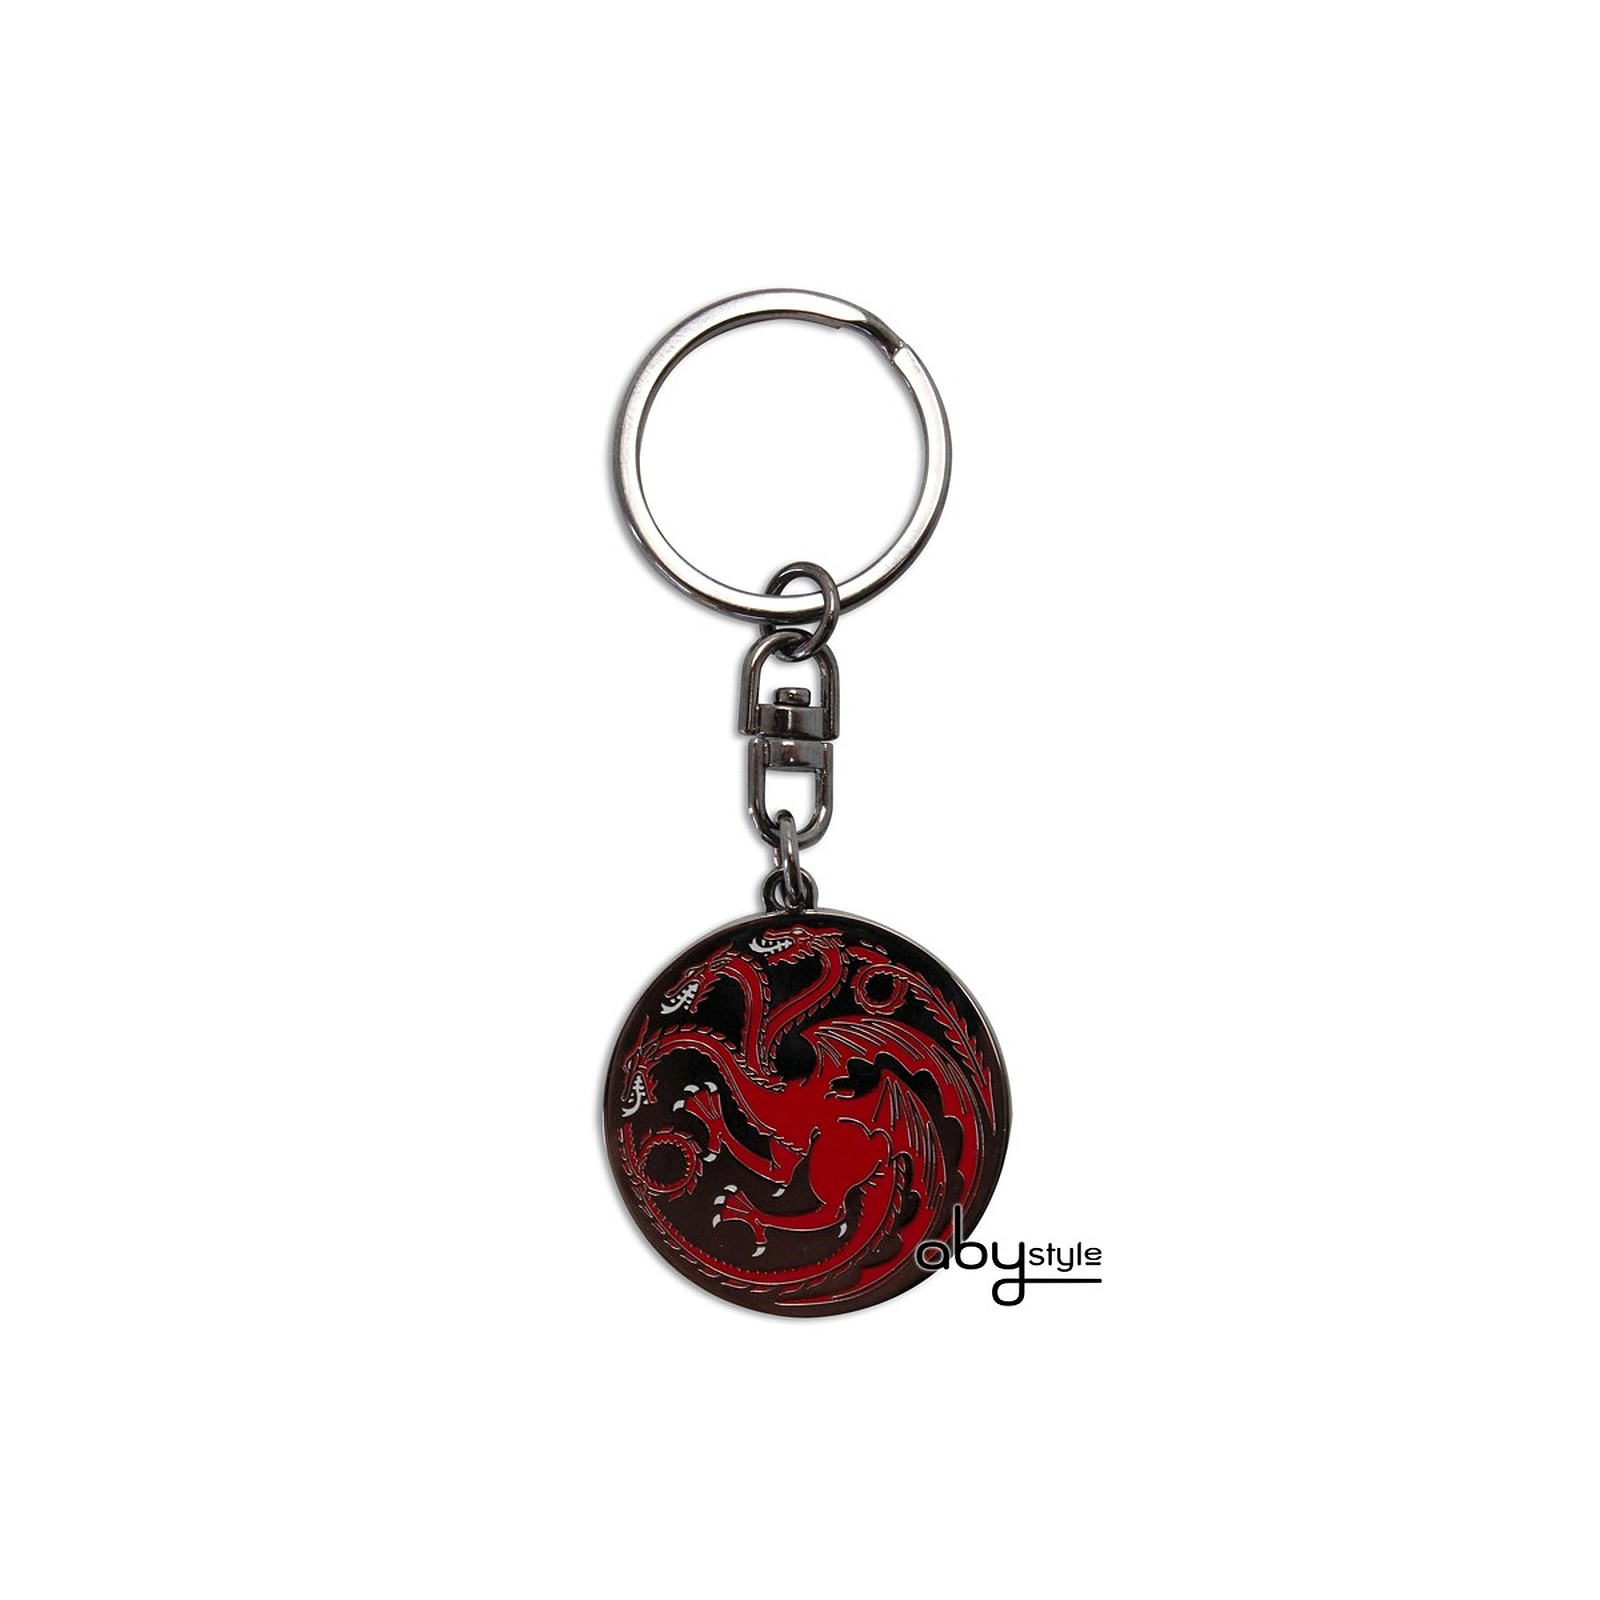 GAME OF THRONES - Porte-cles Targaryen - Porte-cles Abystyle